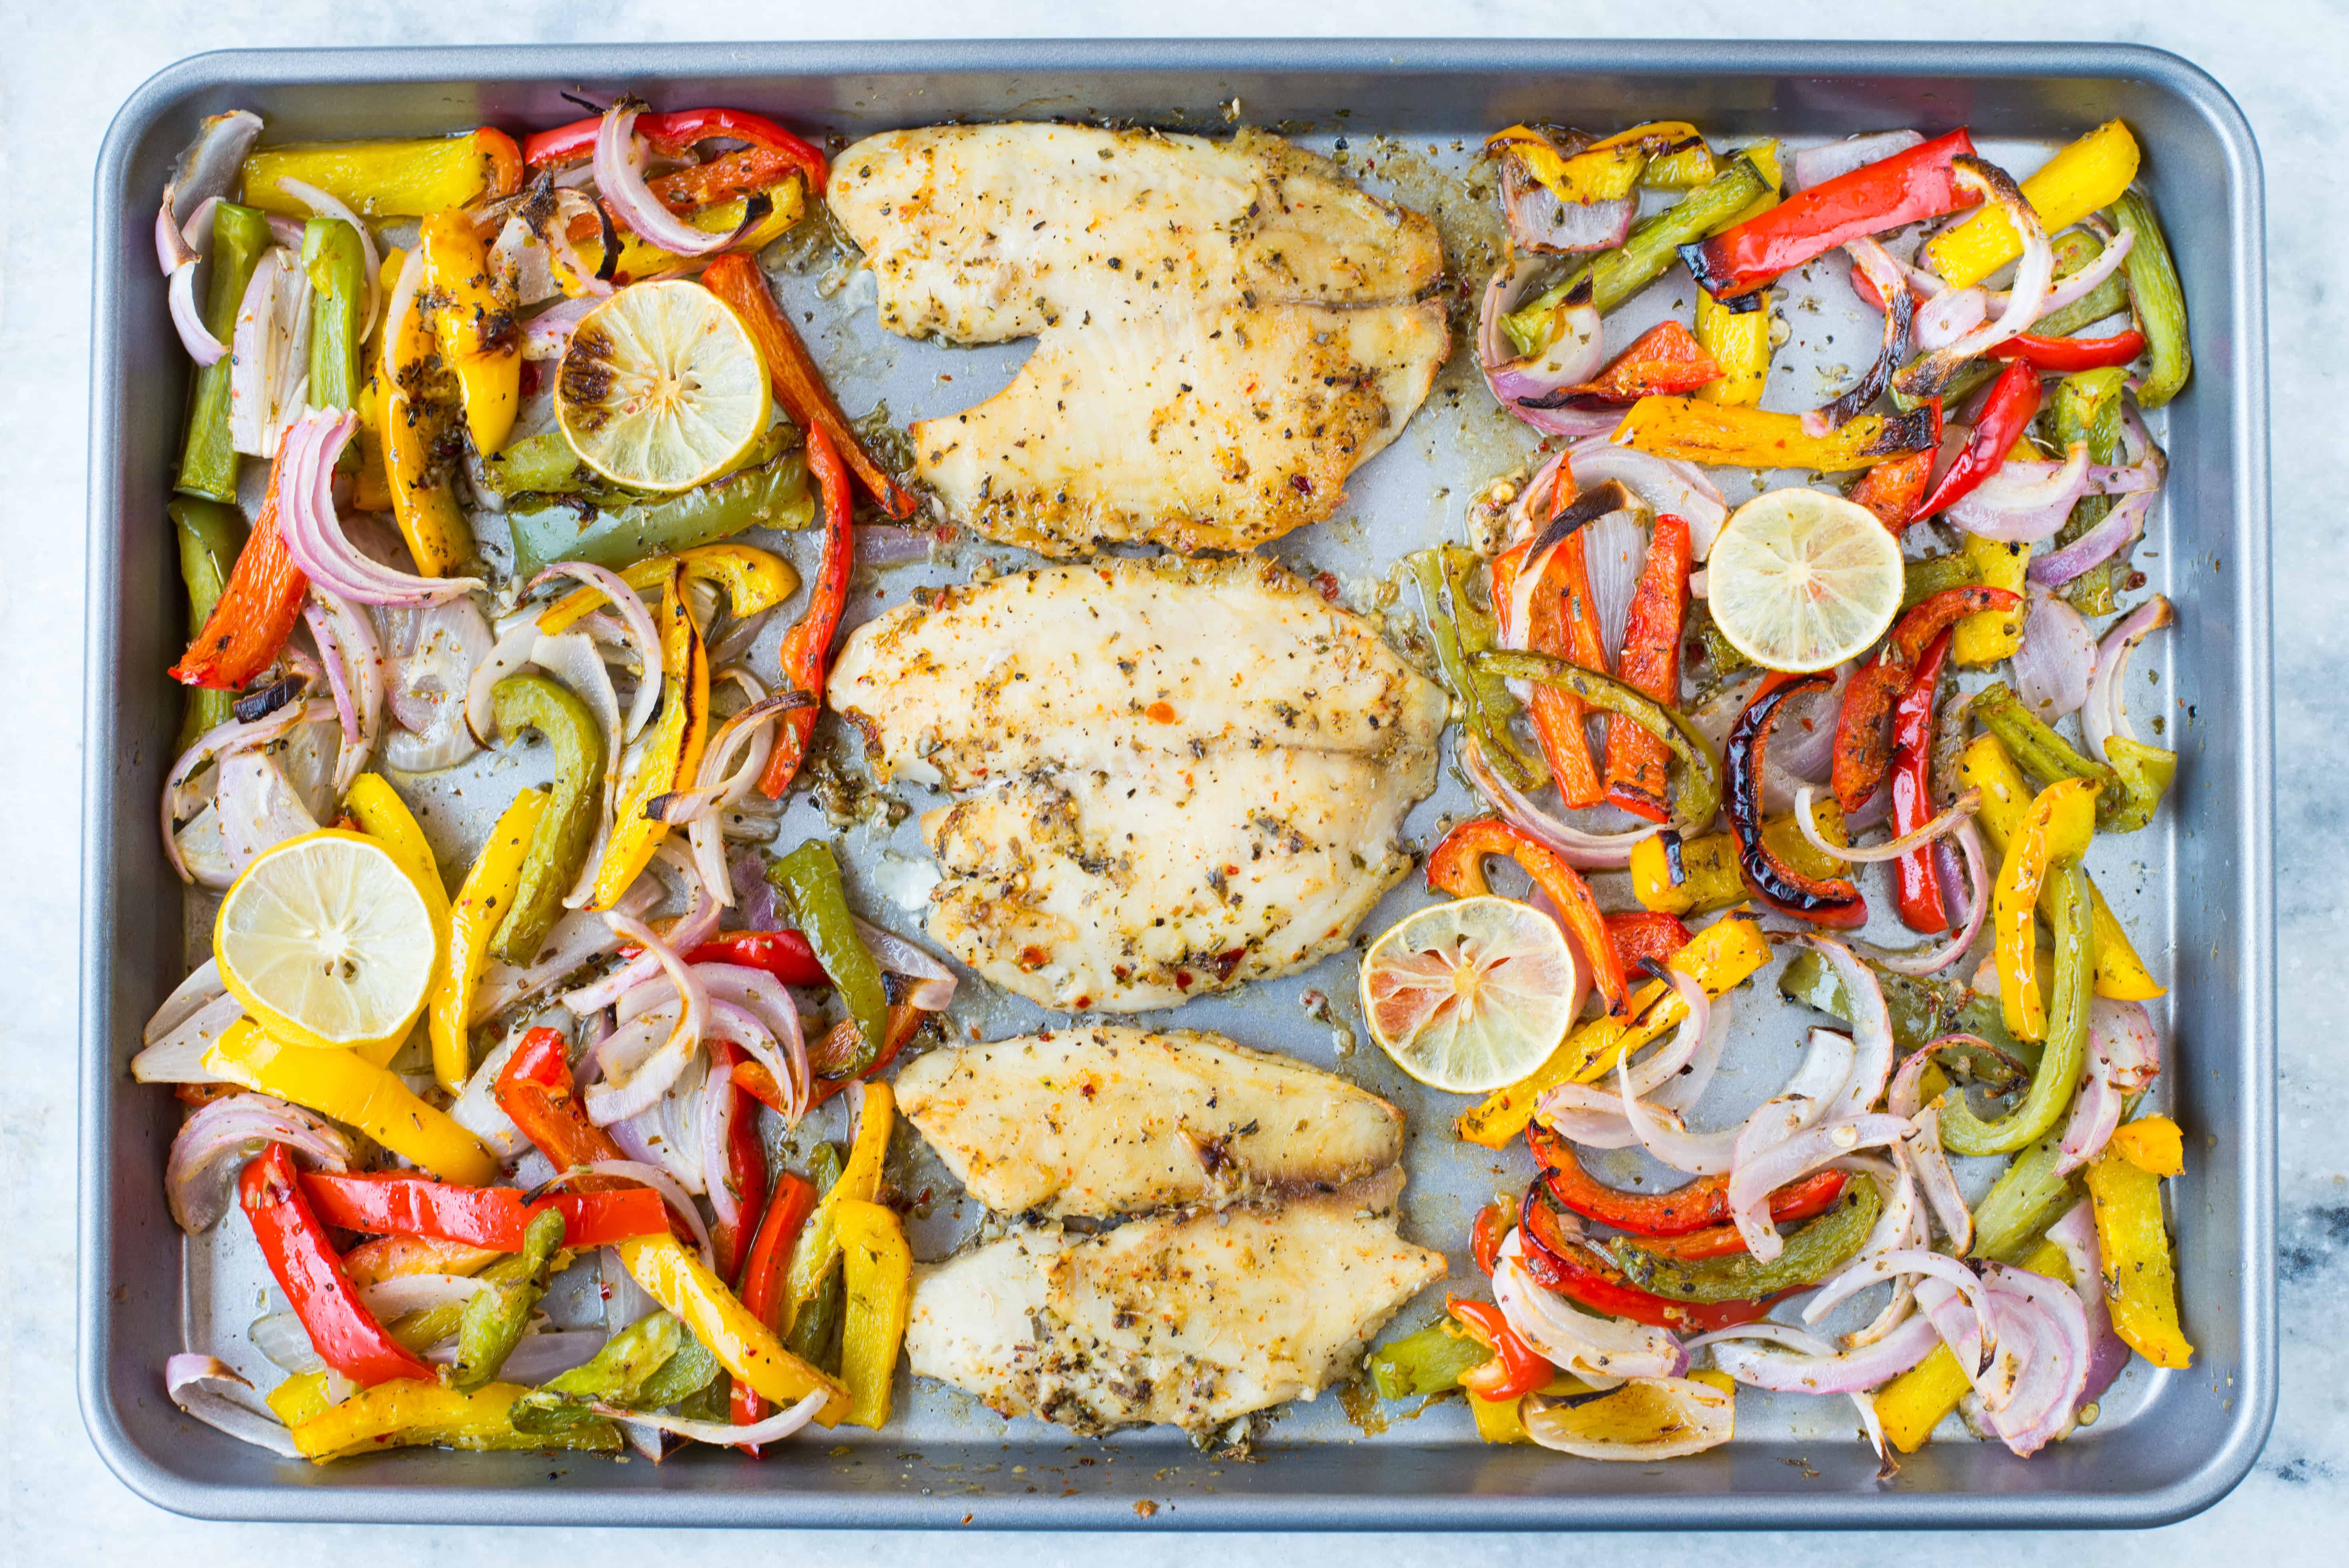 Oven baked Tilapia, onion and pepper in a delicious lemon garlic butter sauce. This Sheet Pan Lemon Garlic Baked Tilapia and Veggies is a healthy dinner made in under 20 minutes.